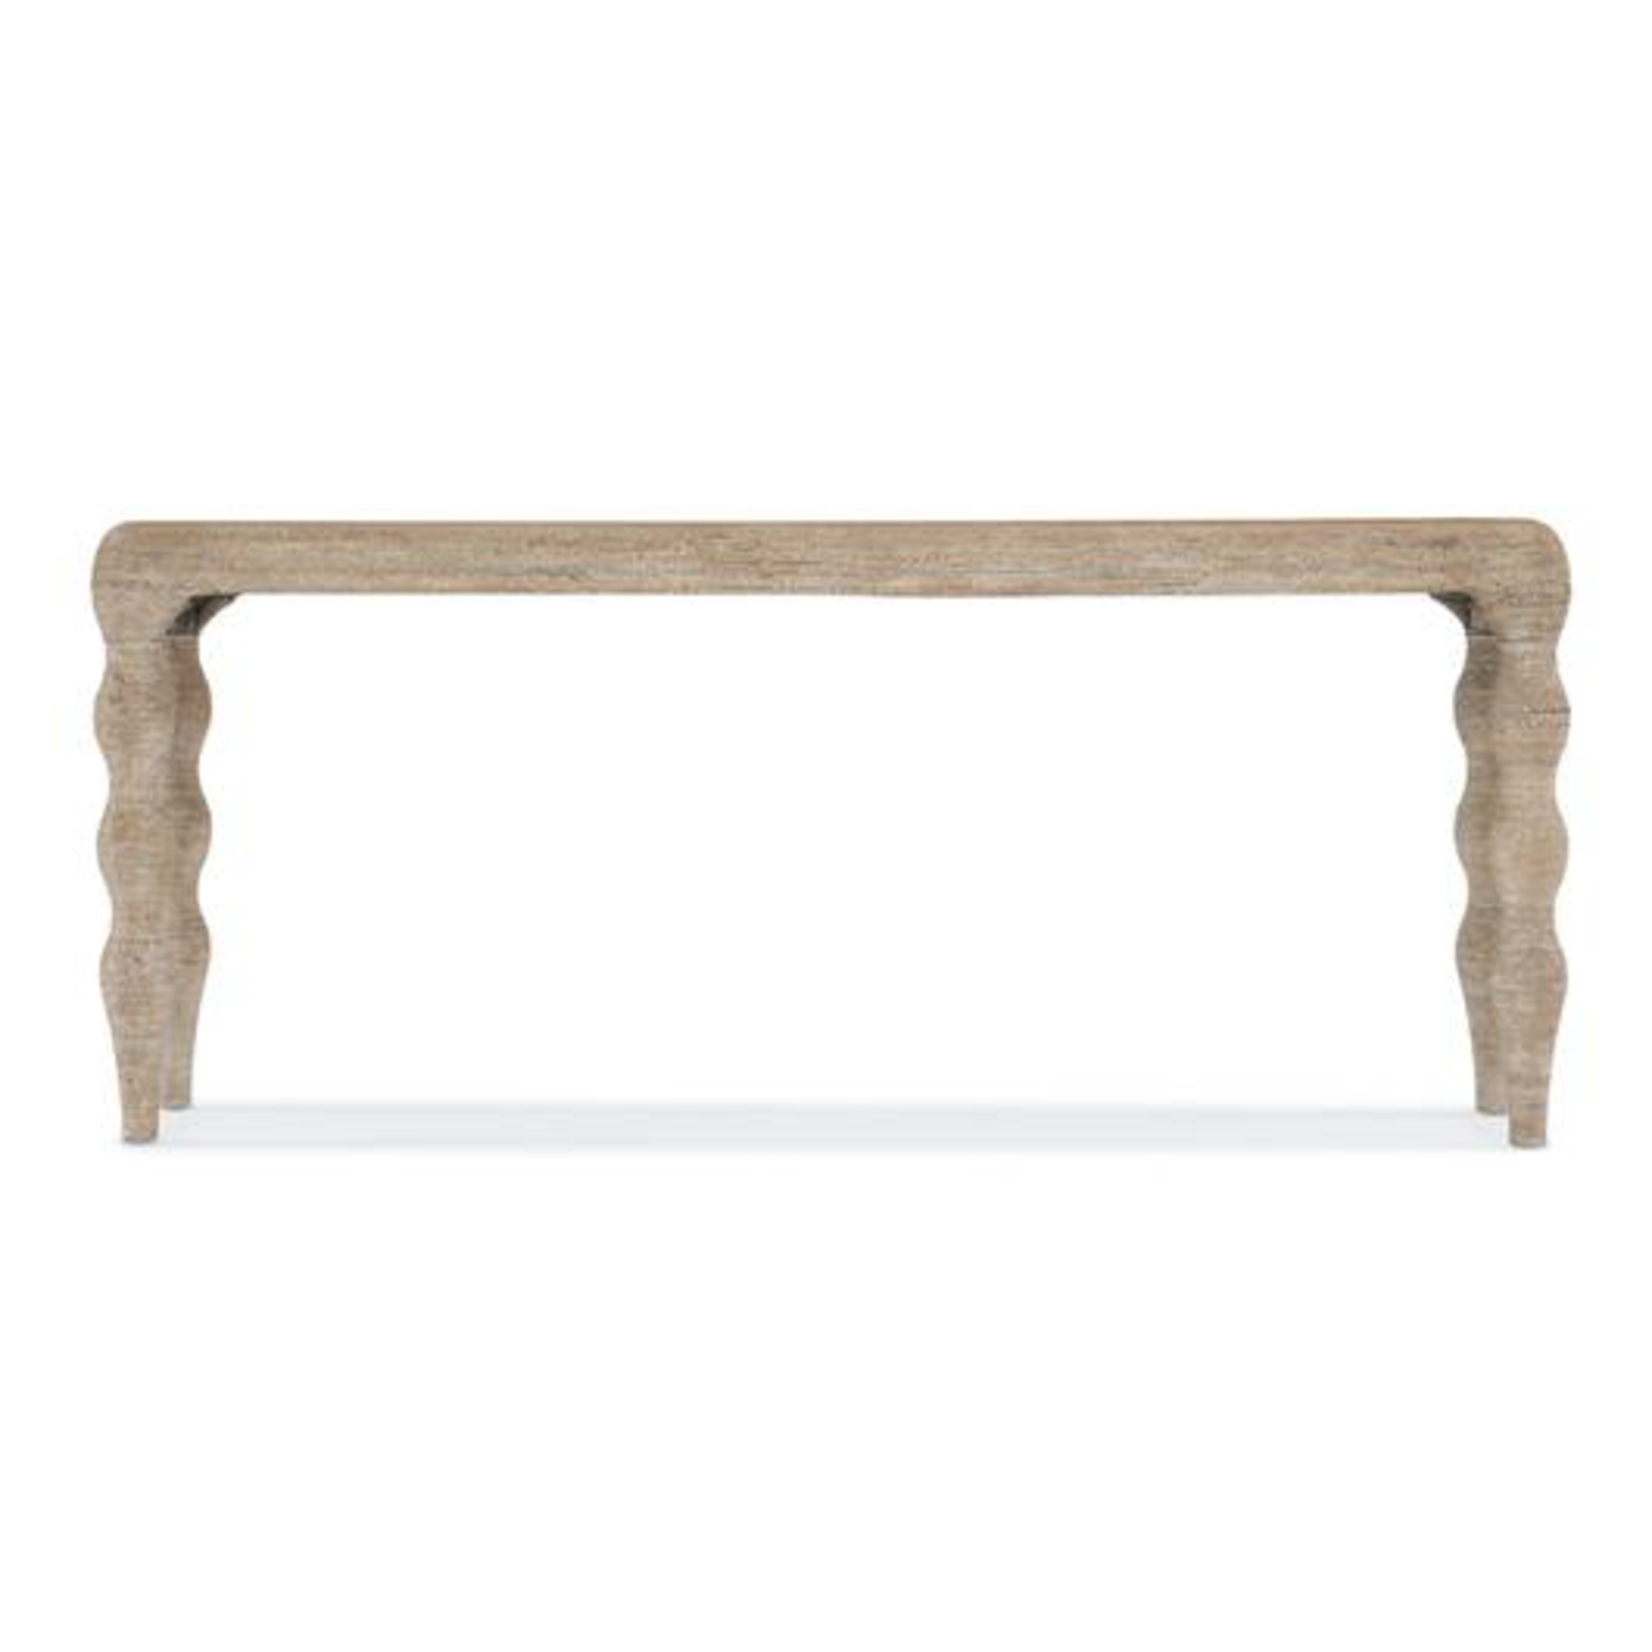 Outside The Box 76x15x32 Hooker Furniture Bahari White Wash Rope Wrapped Solid Wood Console Table